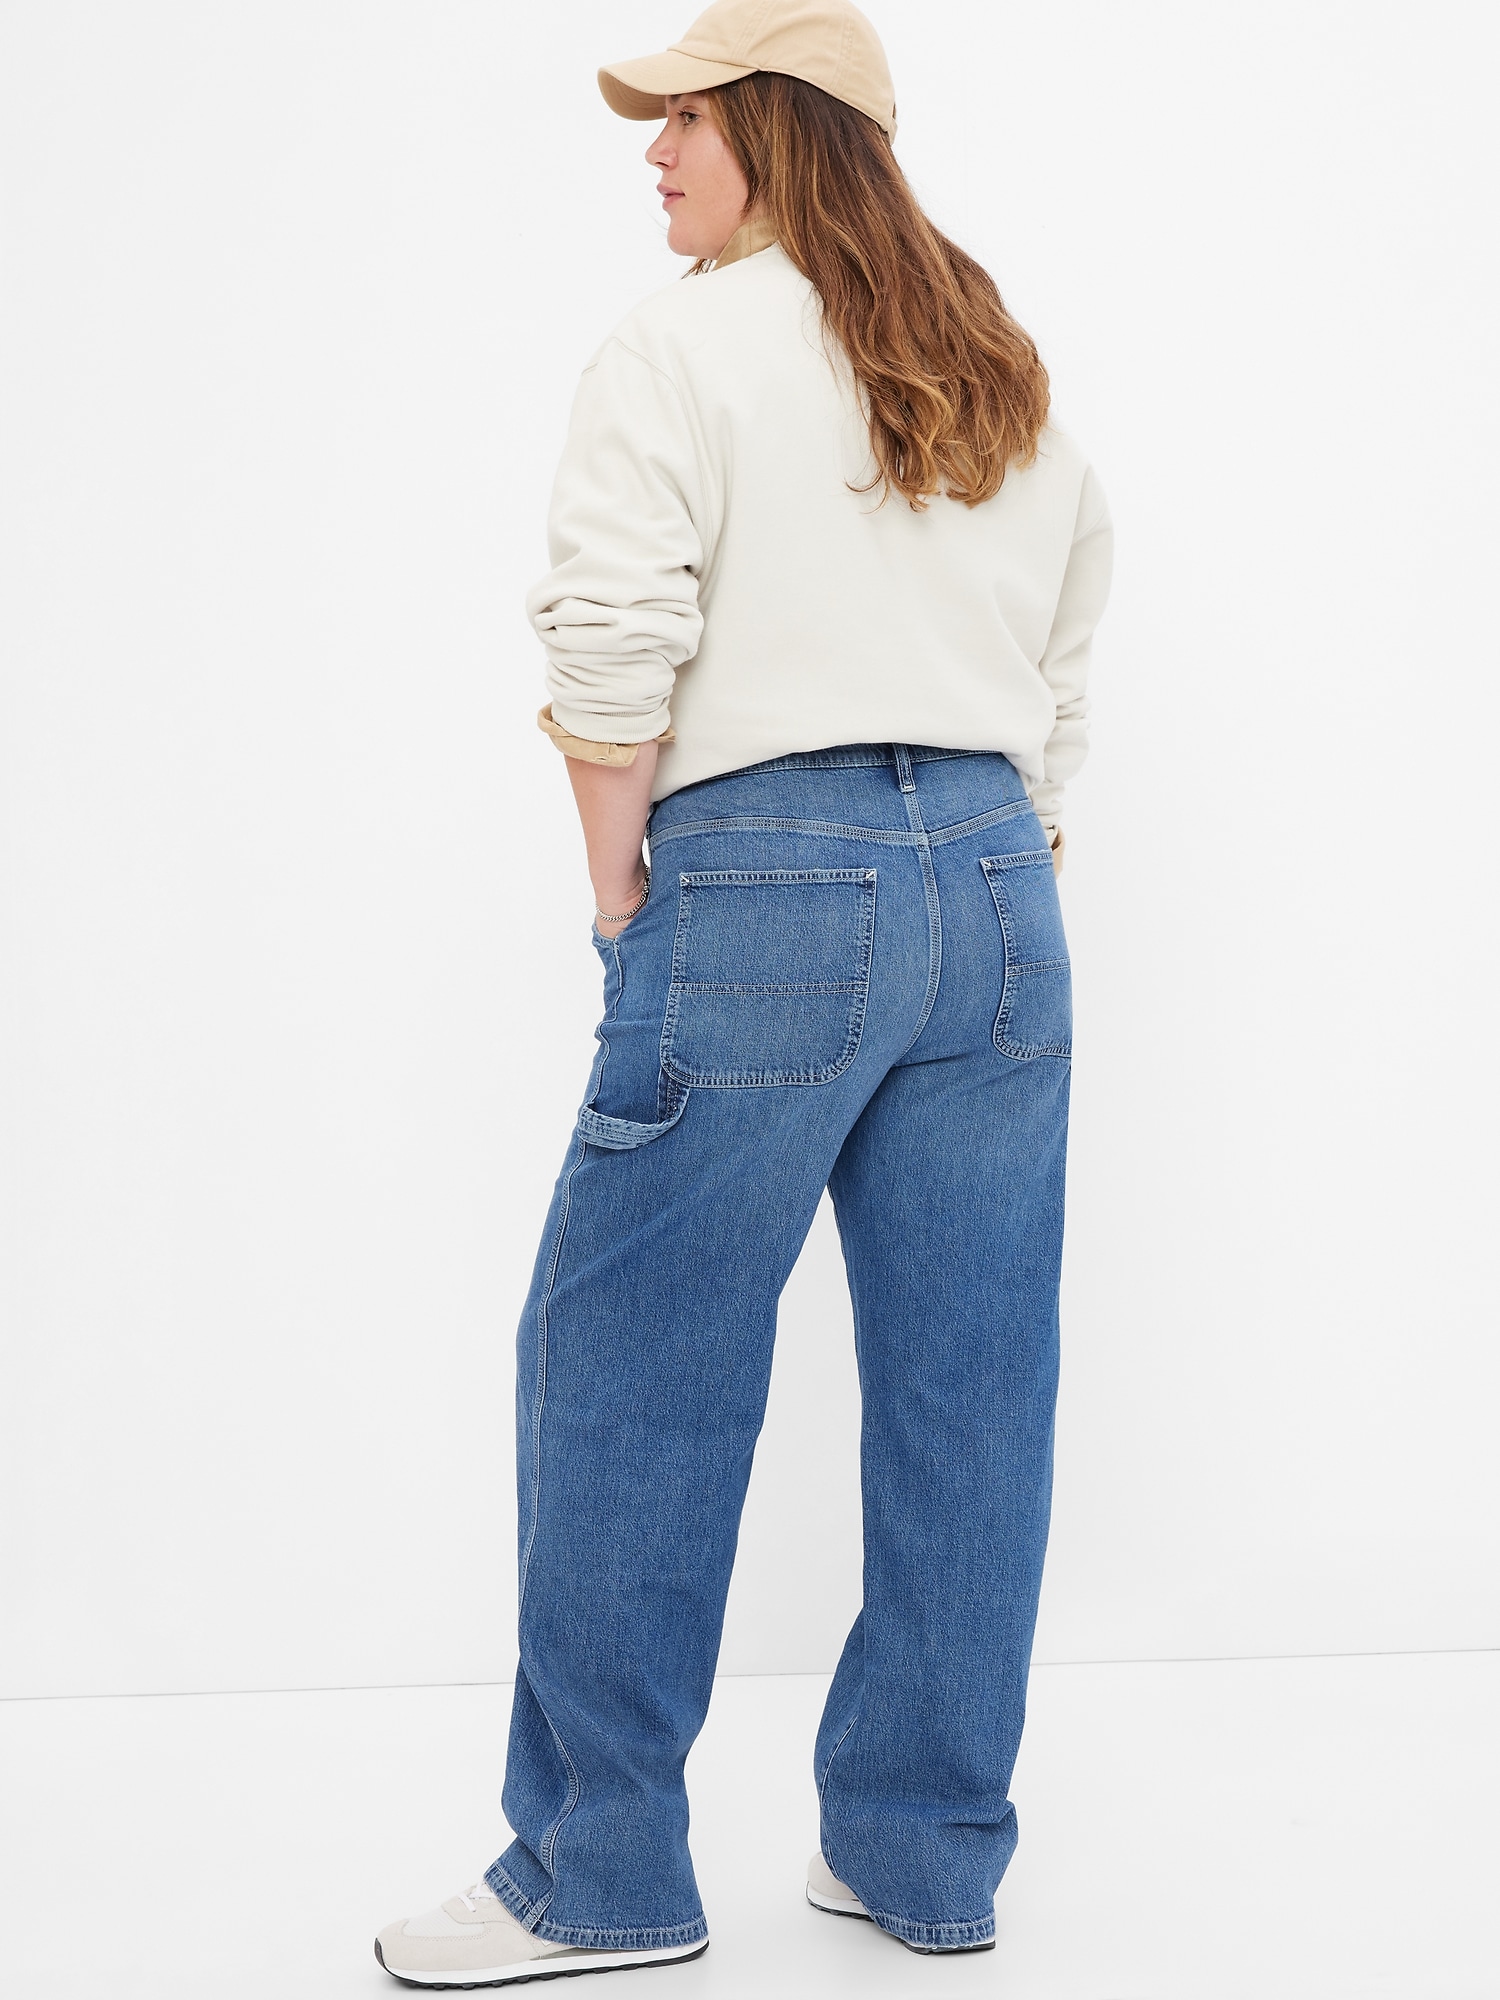 Rise '90s Carpenter Jeans with Washwell | Gap